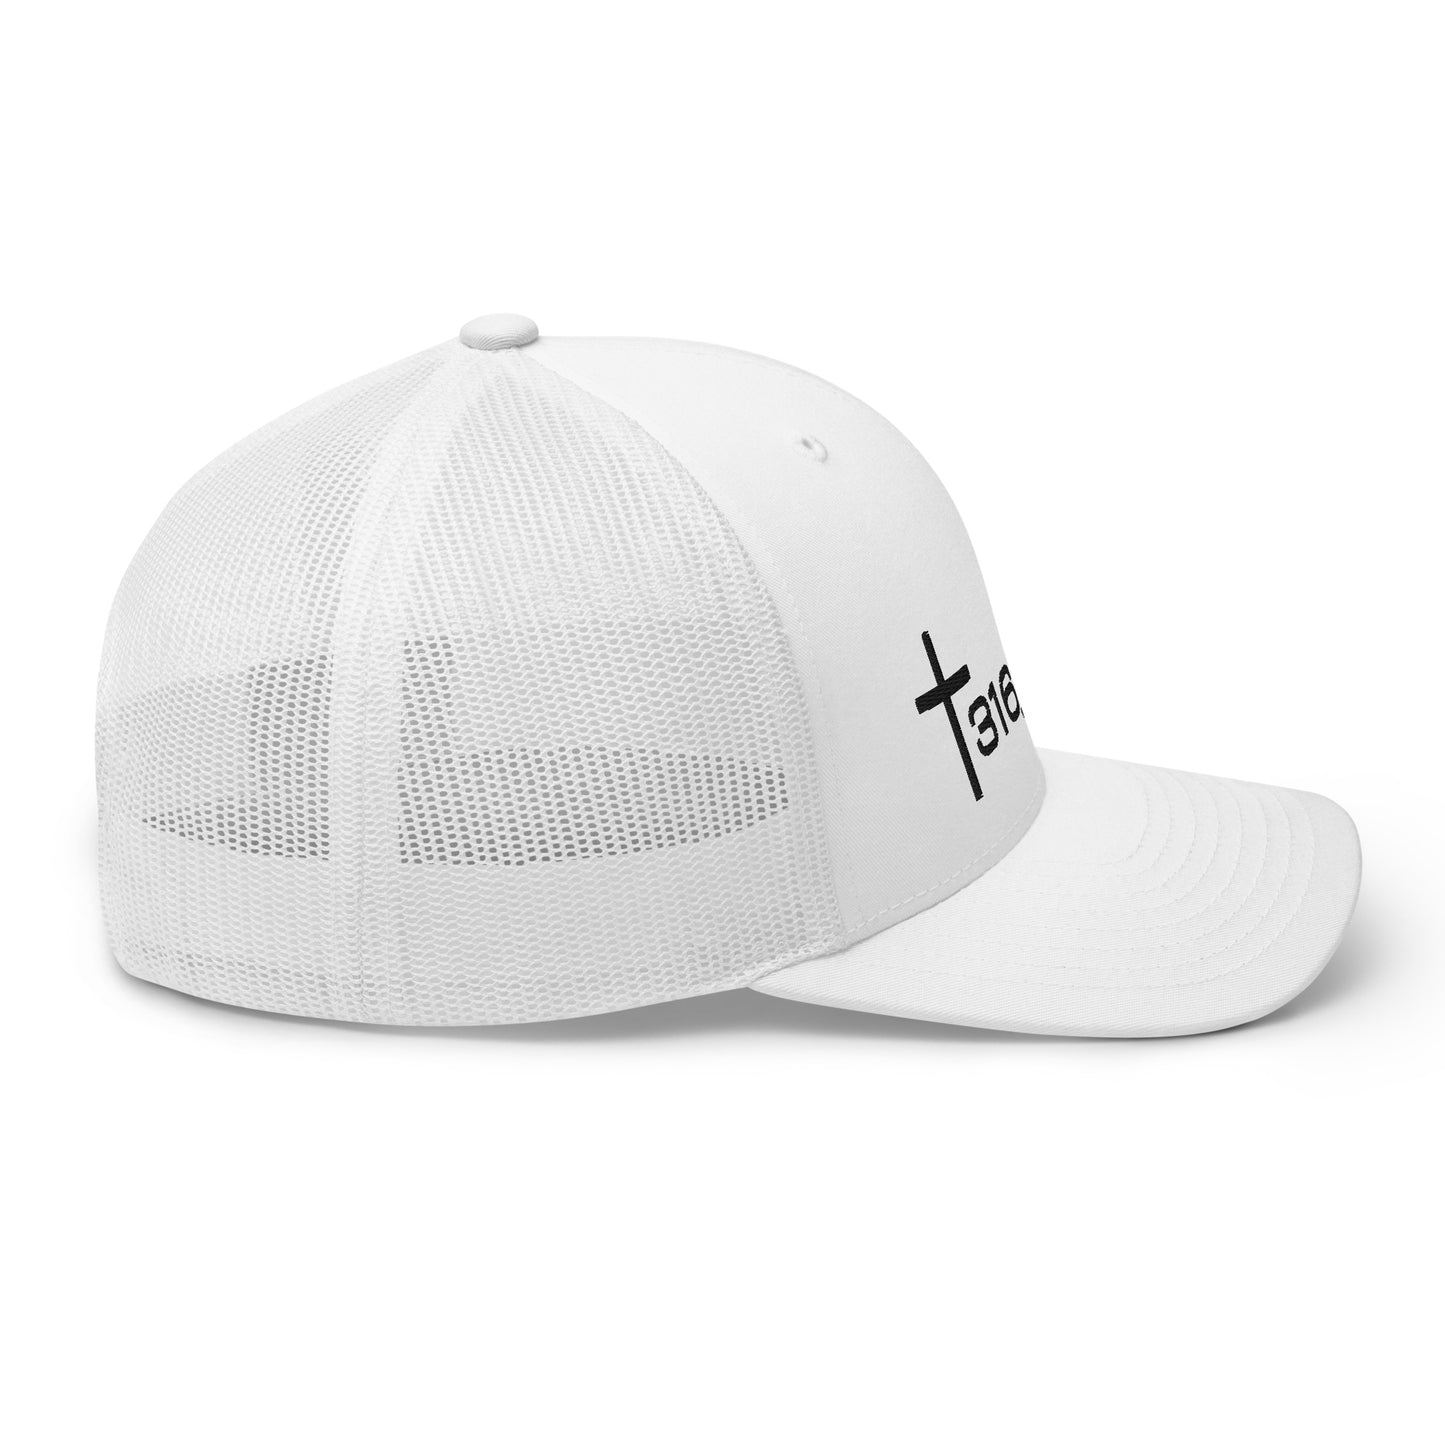 Trinity 316 ICON Structured Snapback Hat - White